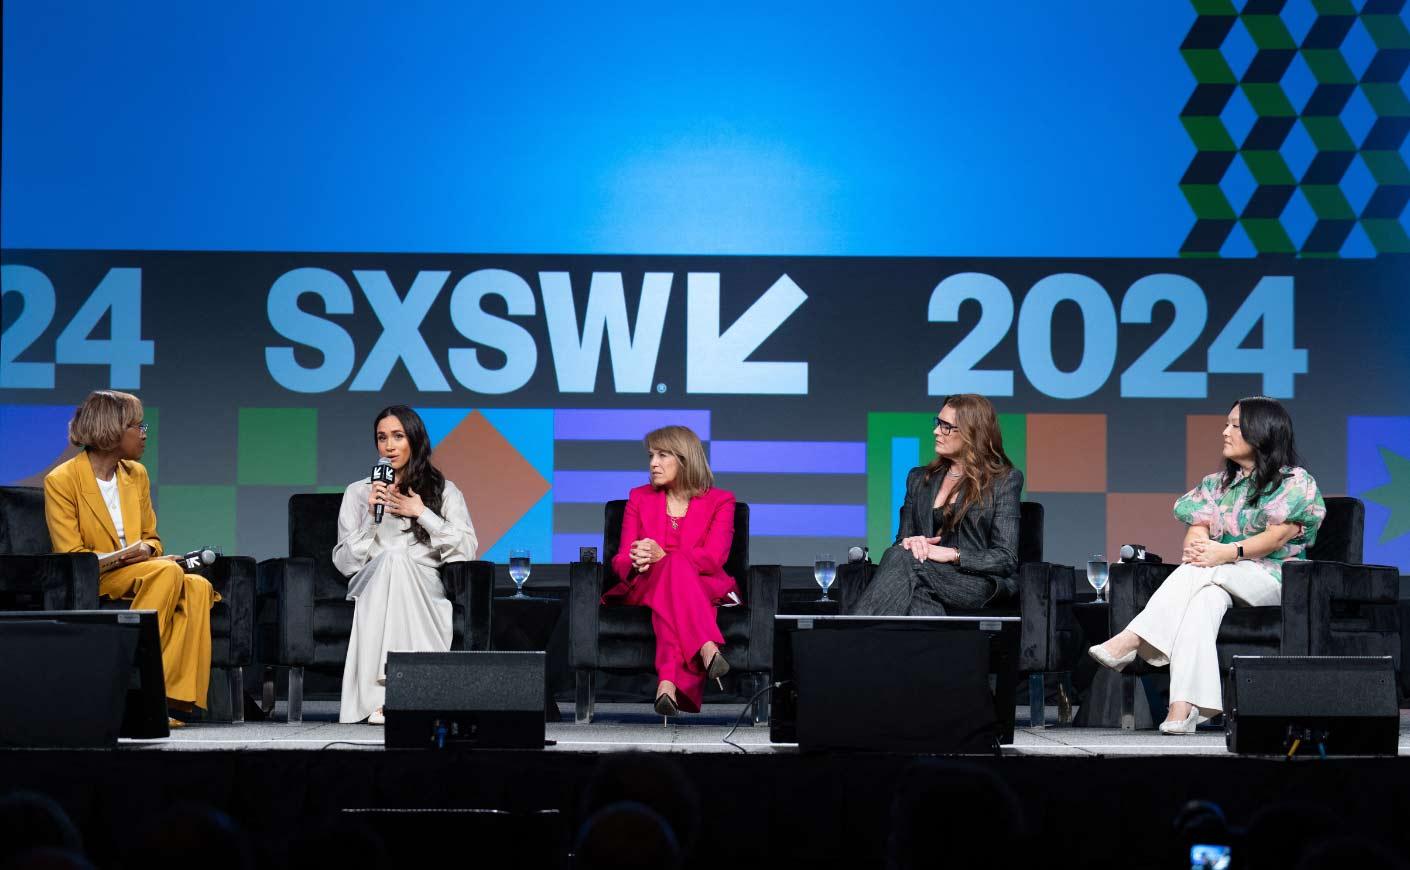  From Innovation to Impact: SXSW Marketing Conference 2024 